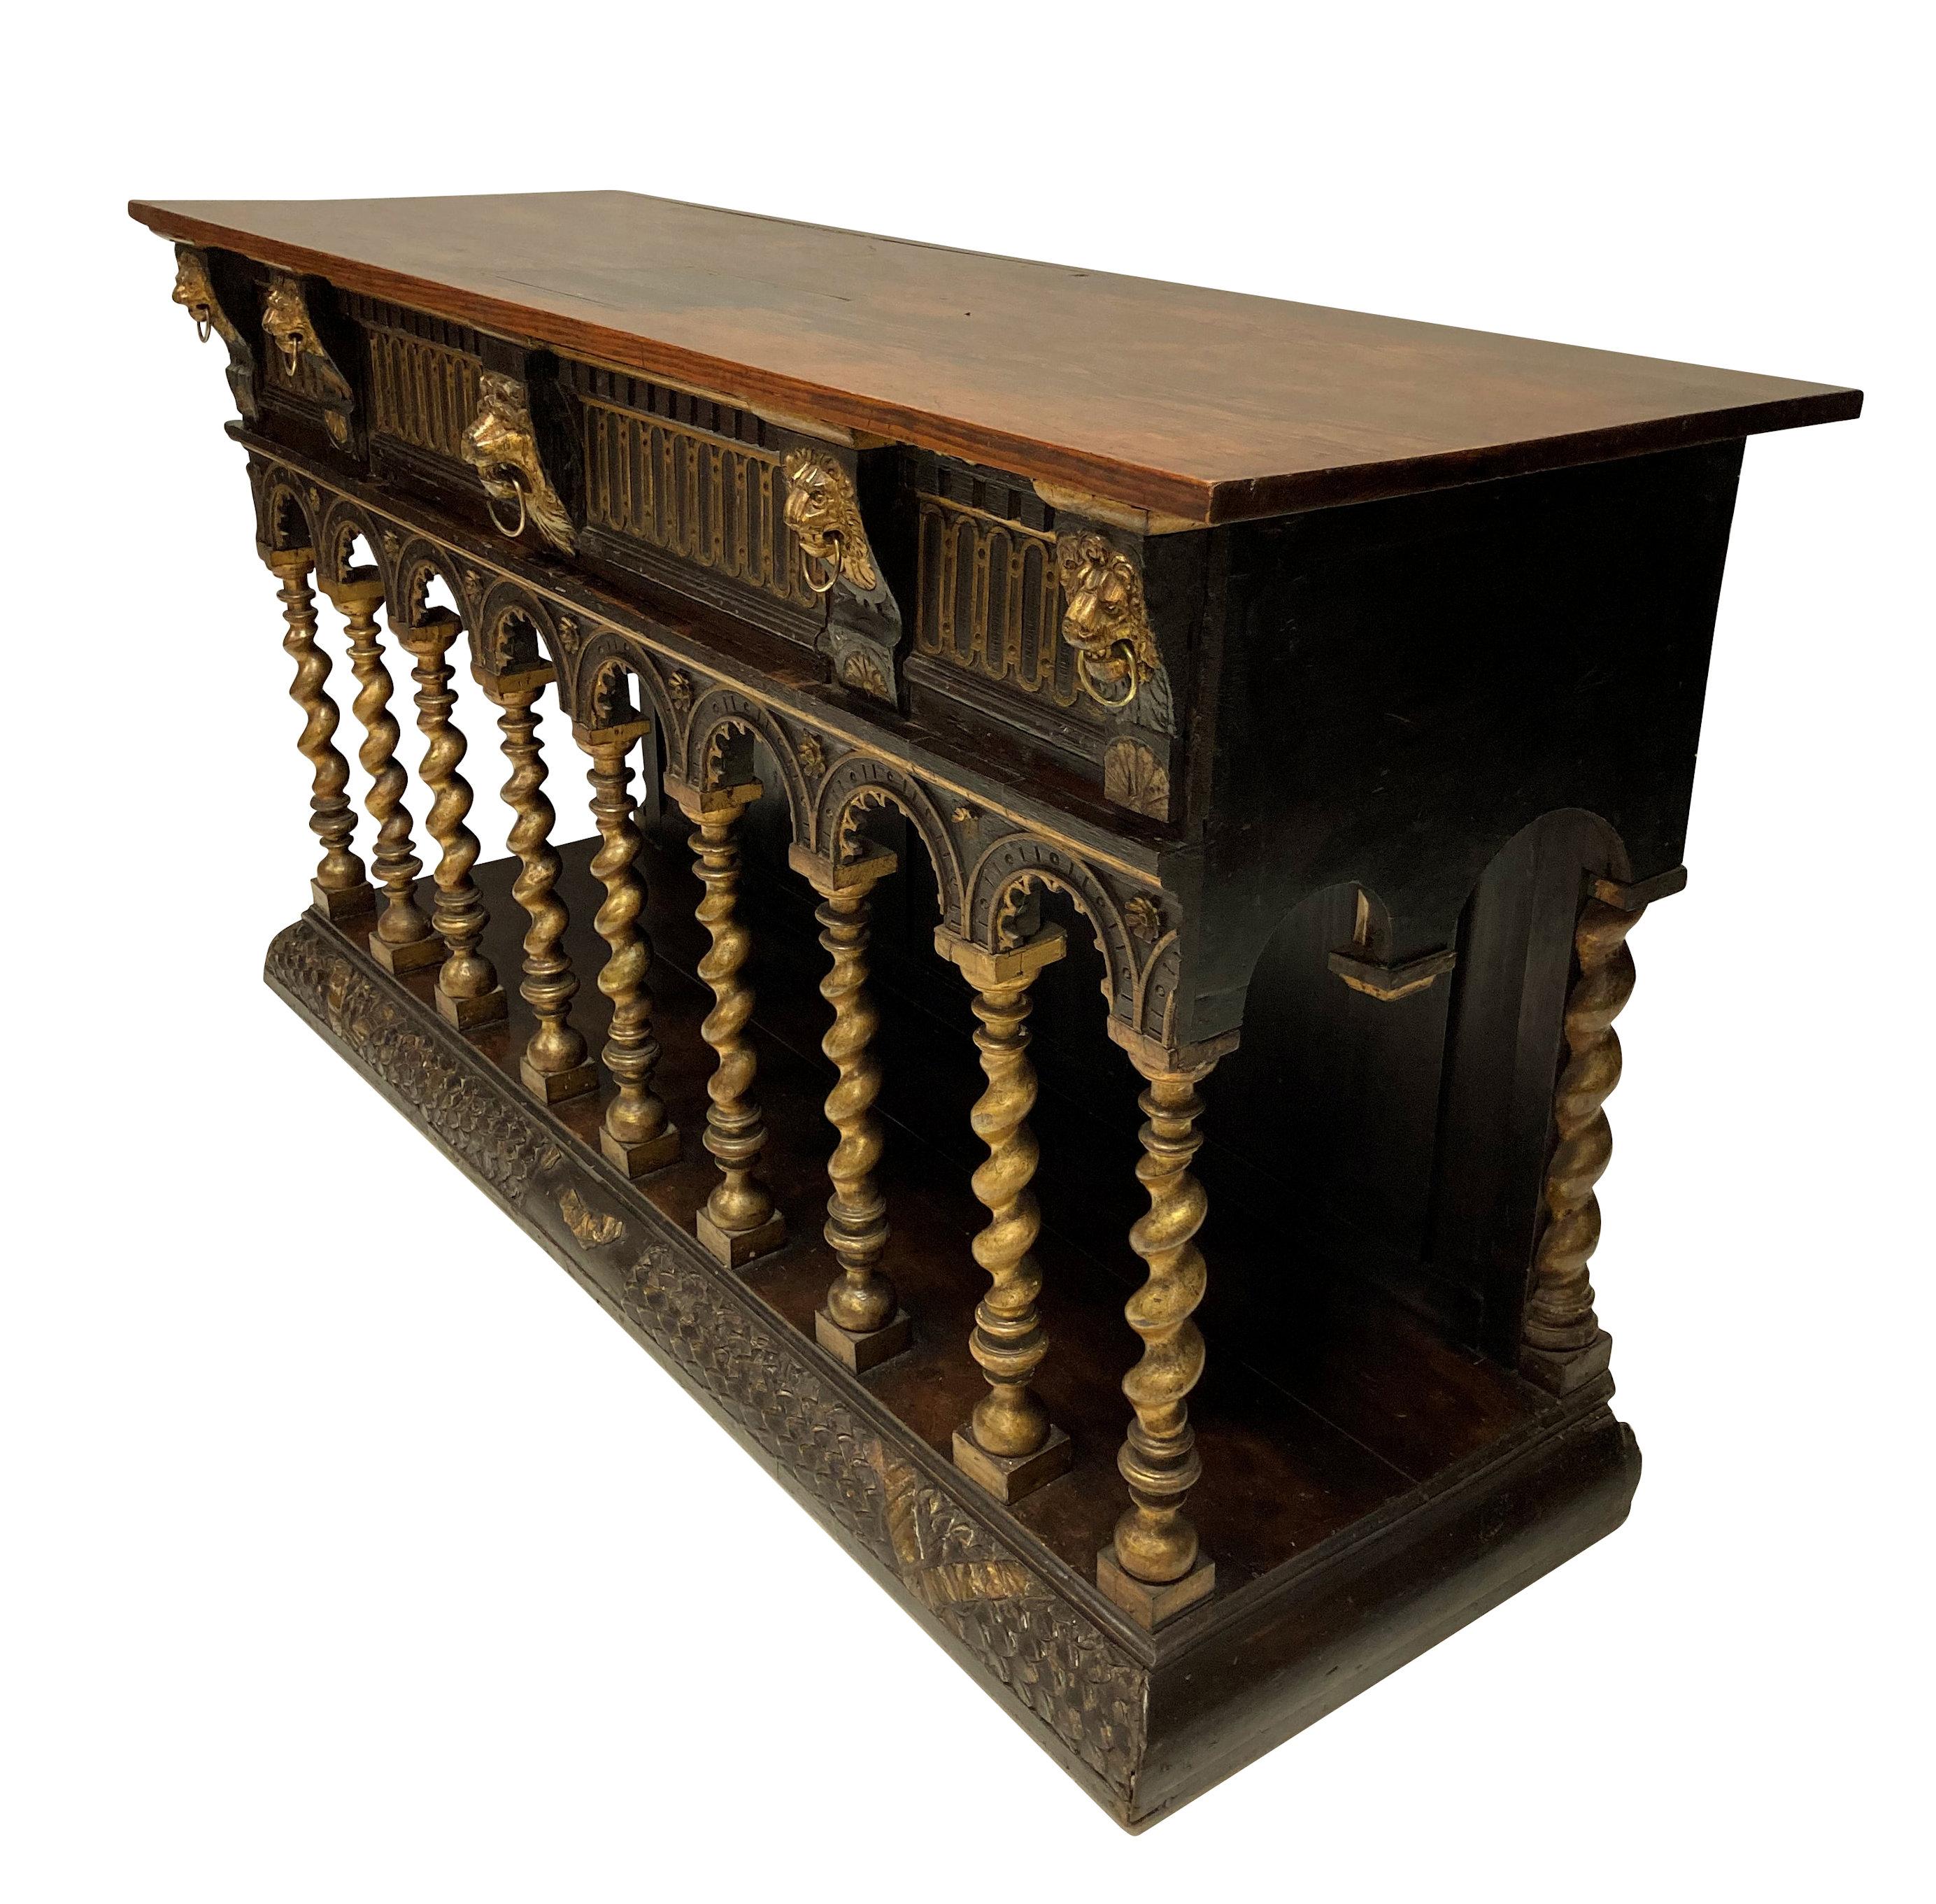 An unusual English sideboard or console in the Romanesque manner, modelled on a Church Altar. Of oak, walnut and parcel-gilt, with single frieze drawer. This item is in the manner of William Burges' furniture, to be found in museums around the